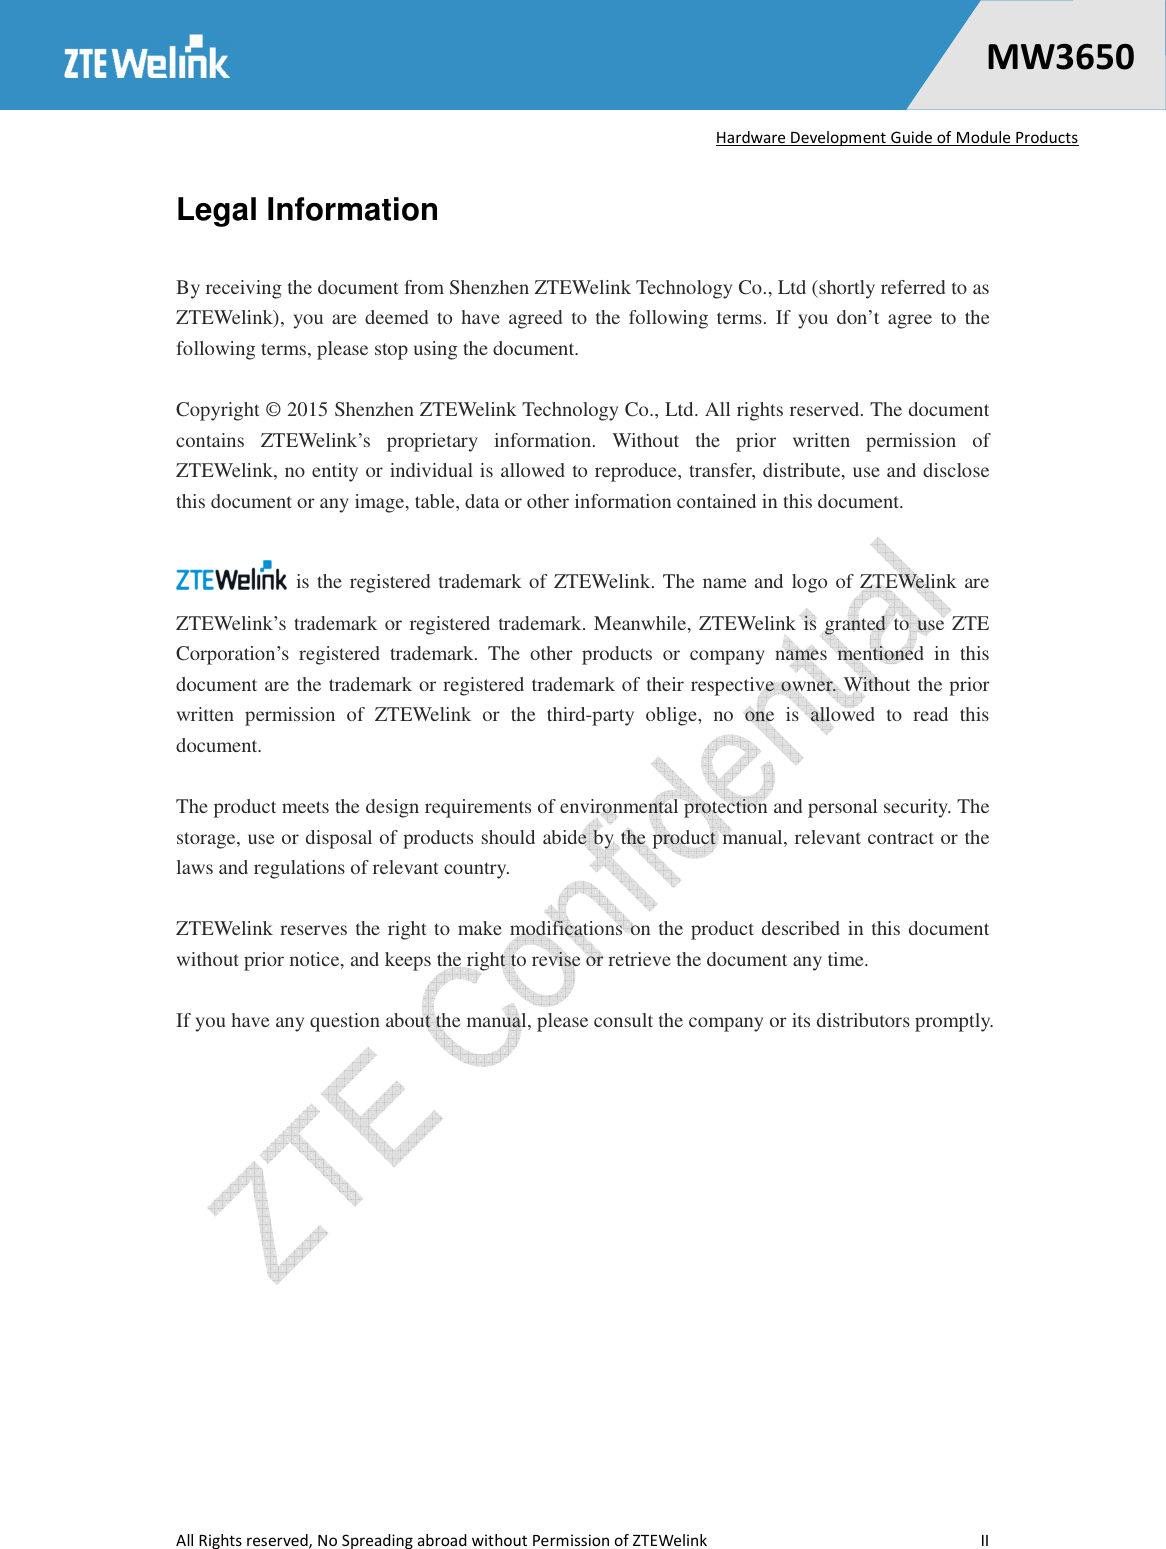   Hardware Development Guide of Module Products  All Rights reserved, No Spreading abroad without Permission of ZTEWelink    II    MW36500 Legal Information  By receiving the document from Shenzhen ZTEWelink Technology Co., Ltd (shortly referred to as ZTEWelink),  you are deemed to  have agreed  to the following terms.  If you don’t agree  to  the following terms, please stop using the document.  Copyright © 2015 Shenzhen ZTEWelink Technology Co., Ltd. All rights reserved. The document contains  ZTEWelink’s  proprietary  information.  Without  the  prior  written  permission  of ZTEWelink, no entity or individual is allowed to reproduce, transfer, distribute, use and disclose this document or any image, table, data or other information contained in this document.    is the registered trademark of ZTEWelink. The name and logo of ZTEWelink are ZTEWelink’s trademark or registered trademark. Meanwhile, ZTEWelink is granted to use ZTE Corporation’s  registered  trademark.  The  other  products  or  company  names  mentioned  in  this document are the trademark or registered trademark of their respective owner. Without the prior written  permission  of  ZTEWelink  or  the  third-party  oblige,  no  one  is  allowed  to  read  this document.  The product meets the design requirements of environmental protection and personal security. The storage, use or disposal of products should abide by the product manual, relevant contract or the laws and regulations of relevant country.    ZTEWelink reserves the right to make modifications on the product described in this document without prior notice, and keeps the right to revise or retrieve the document any time.    If you have any question about the manual, please consult the company or its distributors promptly. 